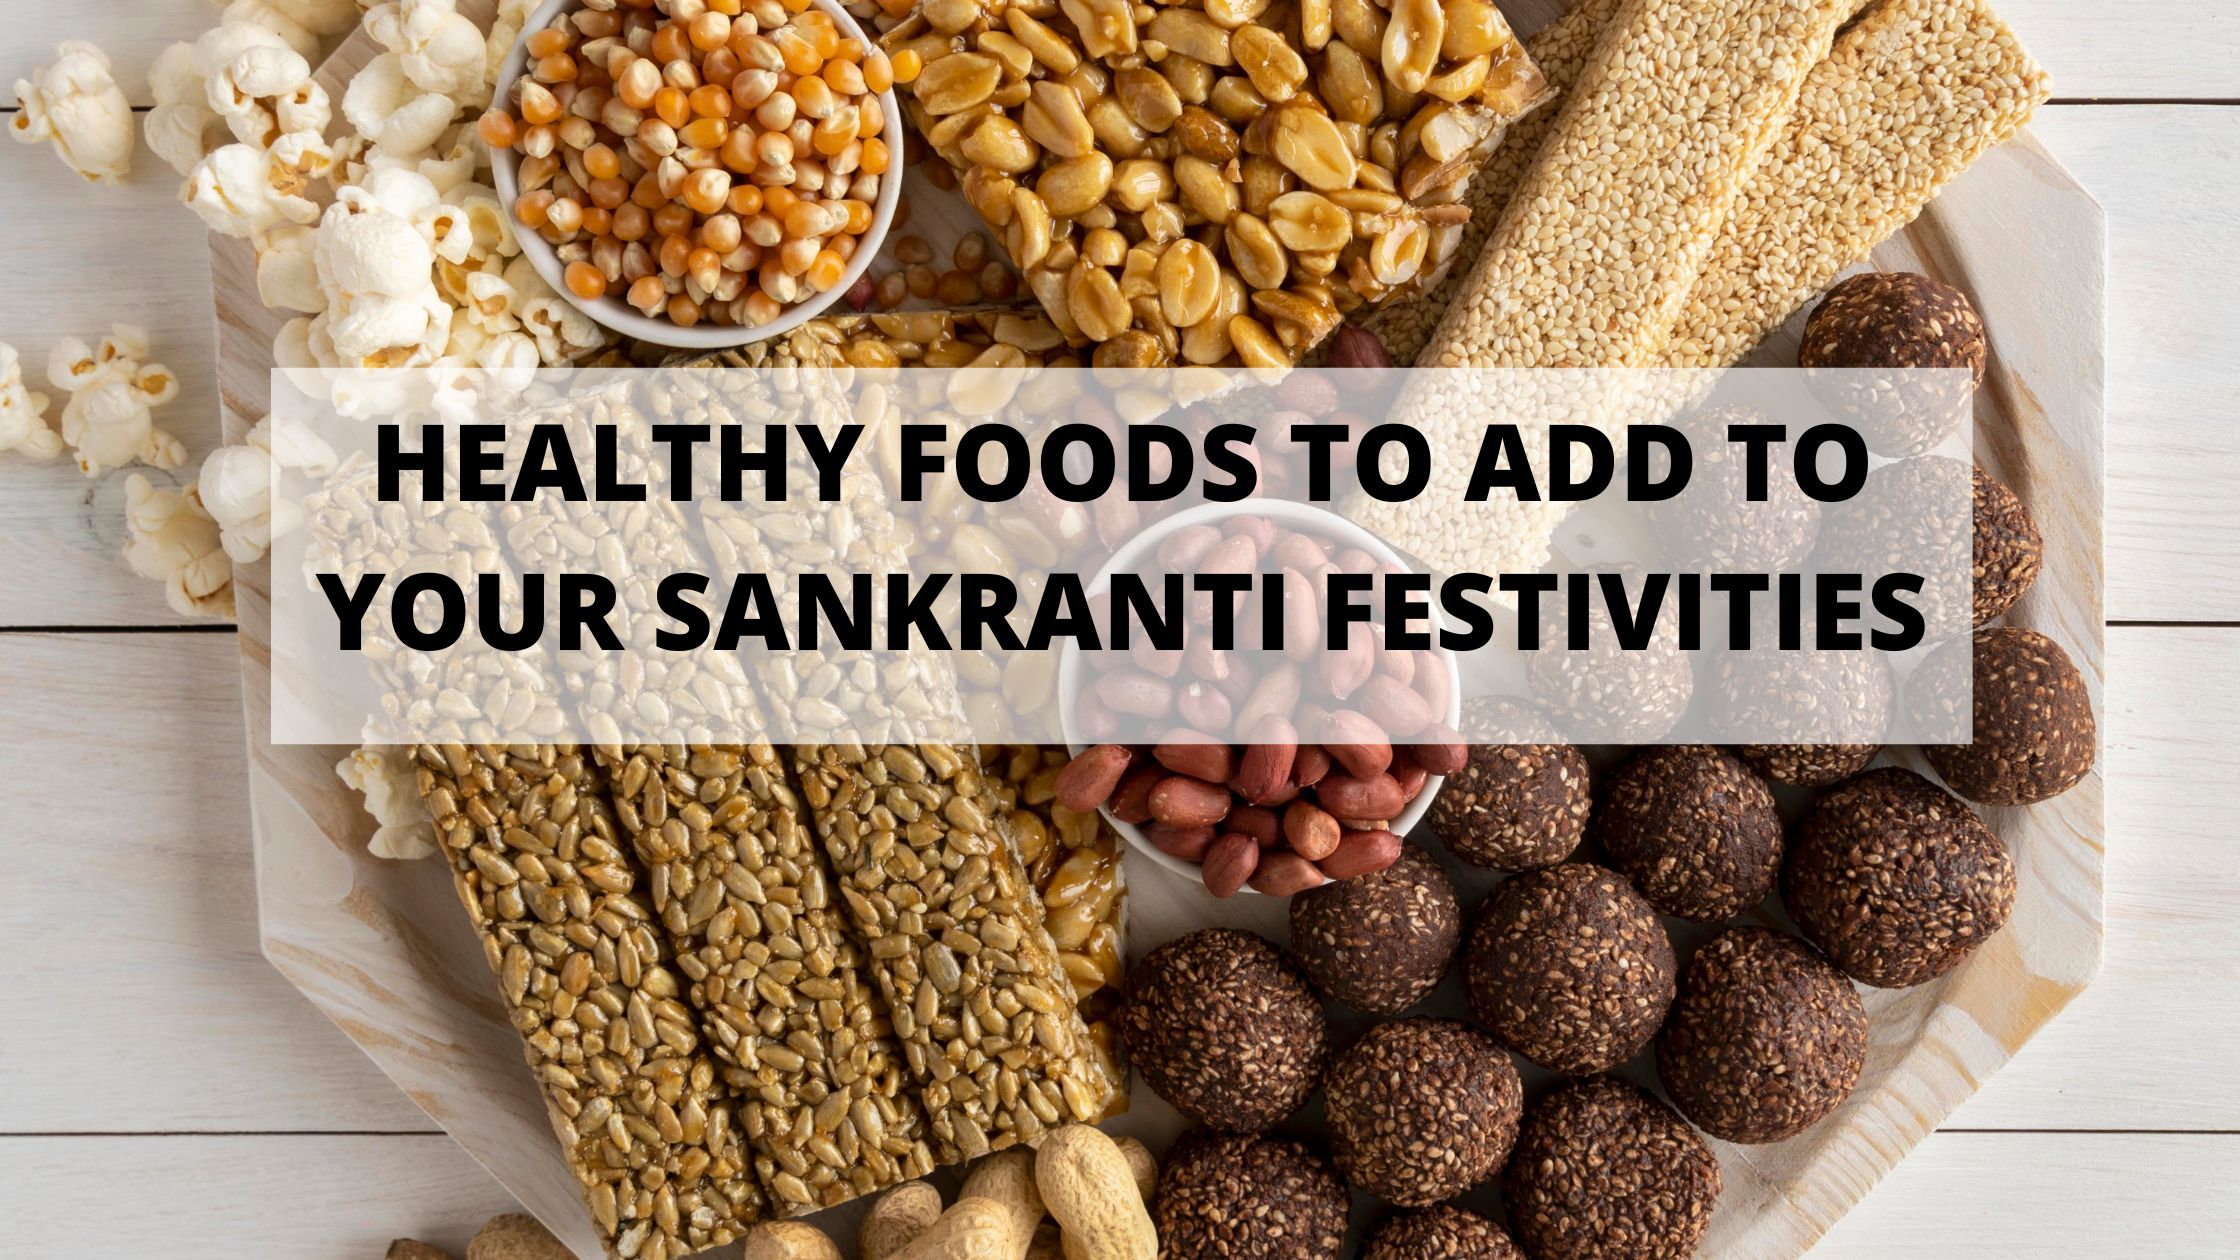 Healthy foods to add to your Sankranti festivities